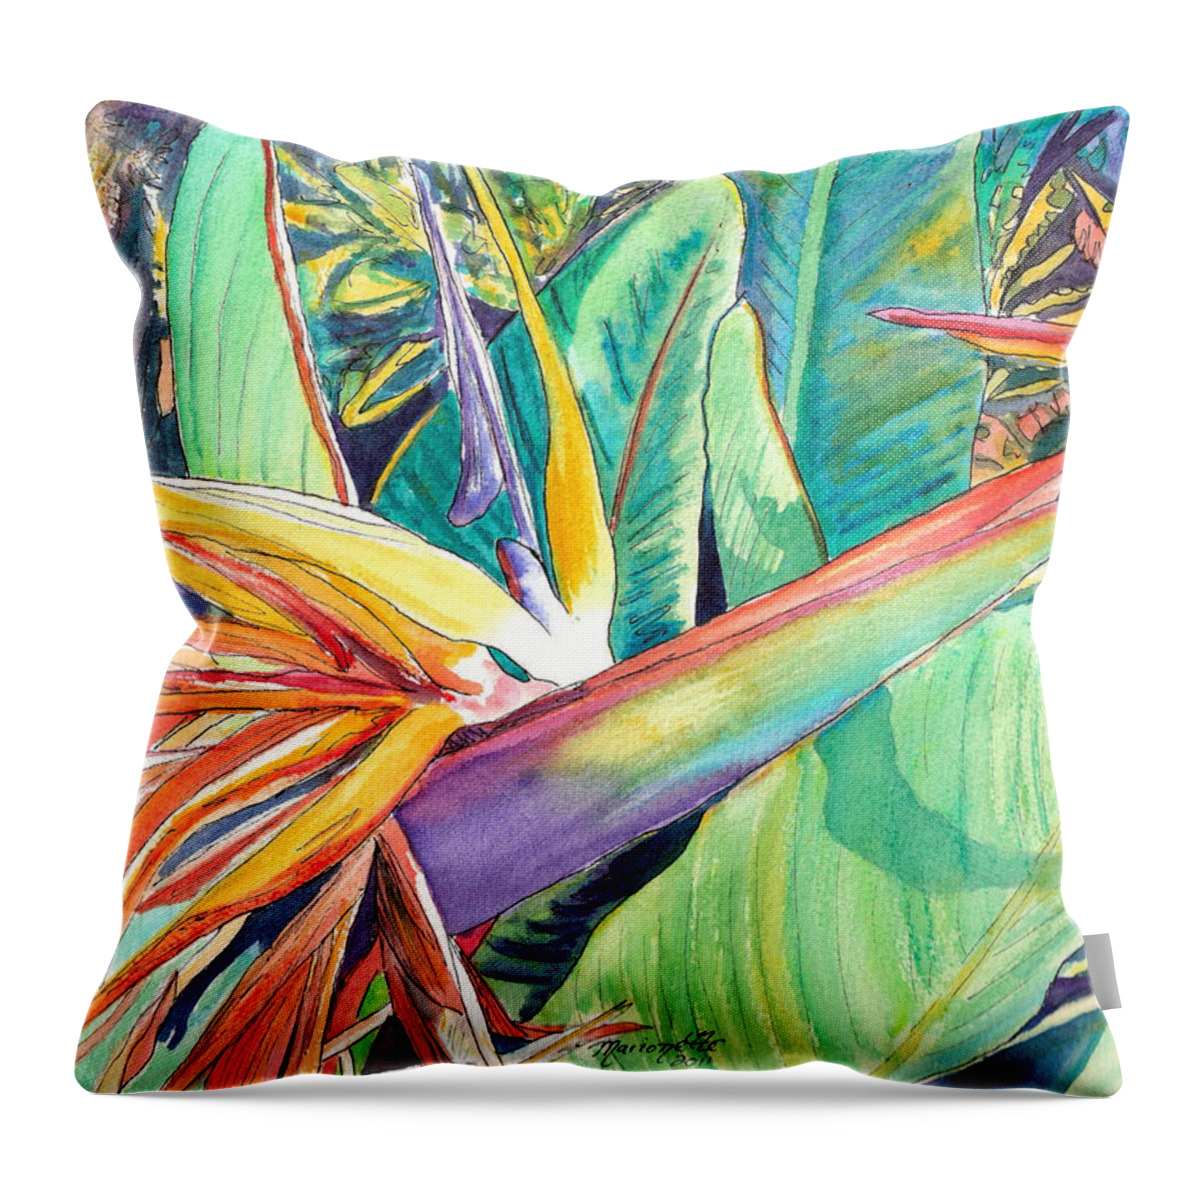 Bird Of Paradise Throw Pillow featuring the painting Bird of Paradise 2 by Marionette Taboniar